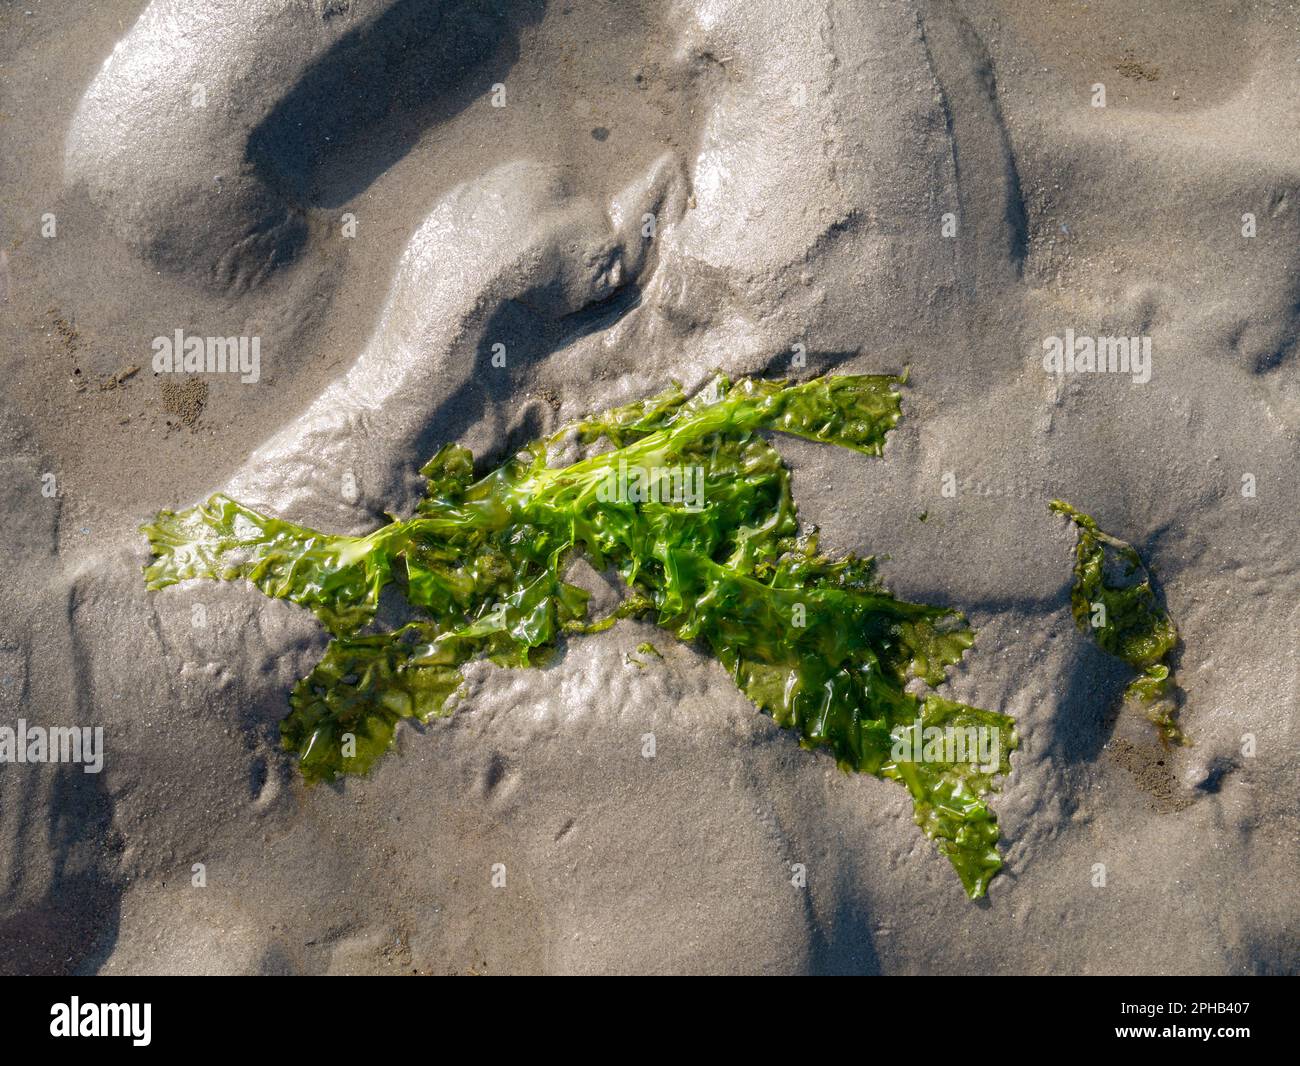 Sea lettuce, Ulva lactuca, on sand at low tide of Wadden sea, Netherlands Stock Photo